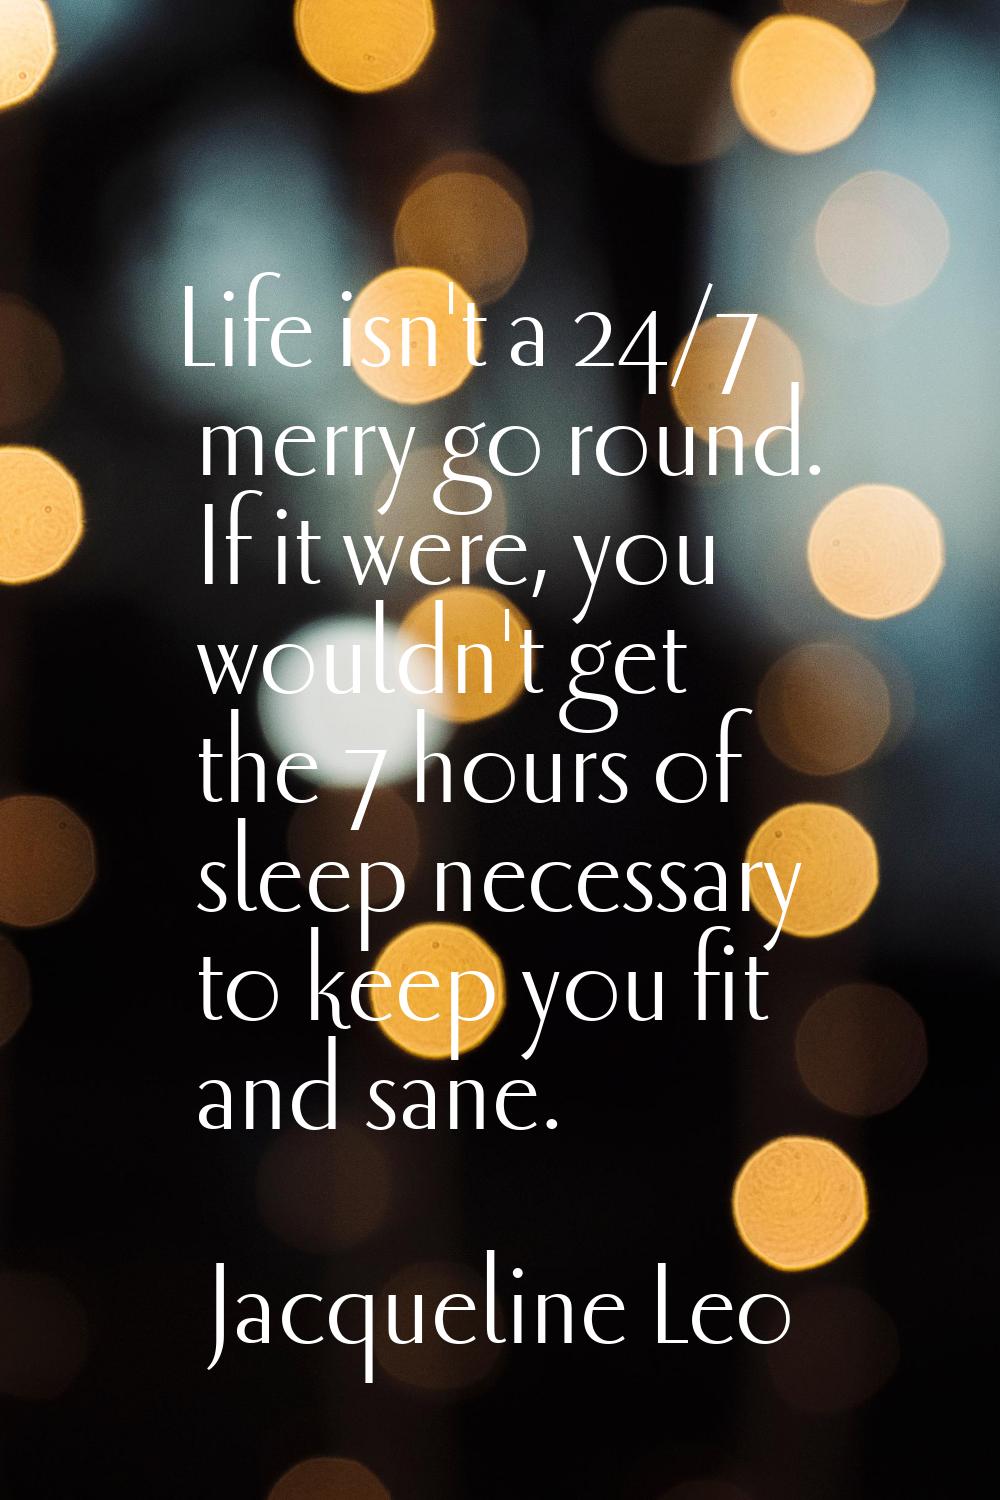 Life isn't a 24/7 merry go round. If it were, you wouldn't get the 7 hours of sleep necessary to ke